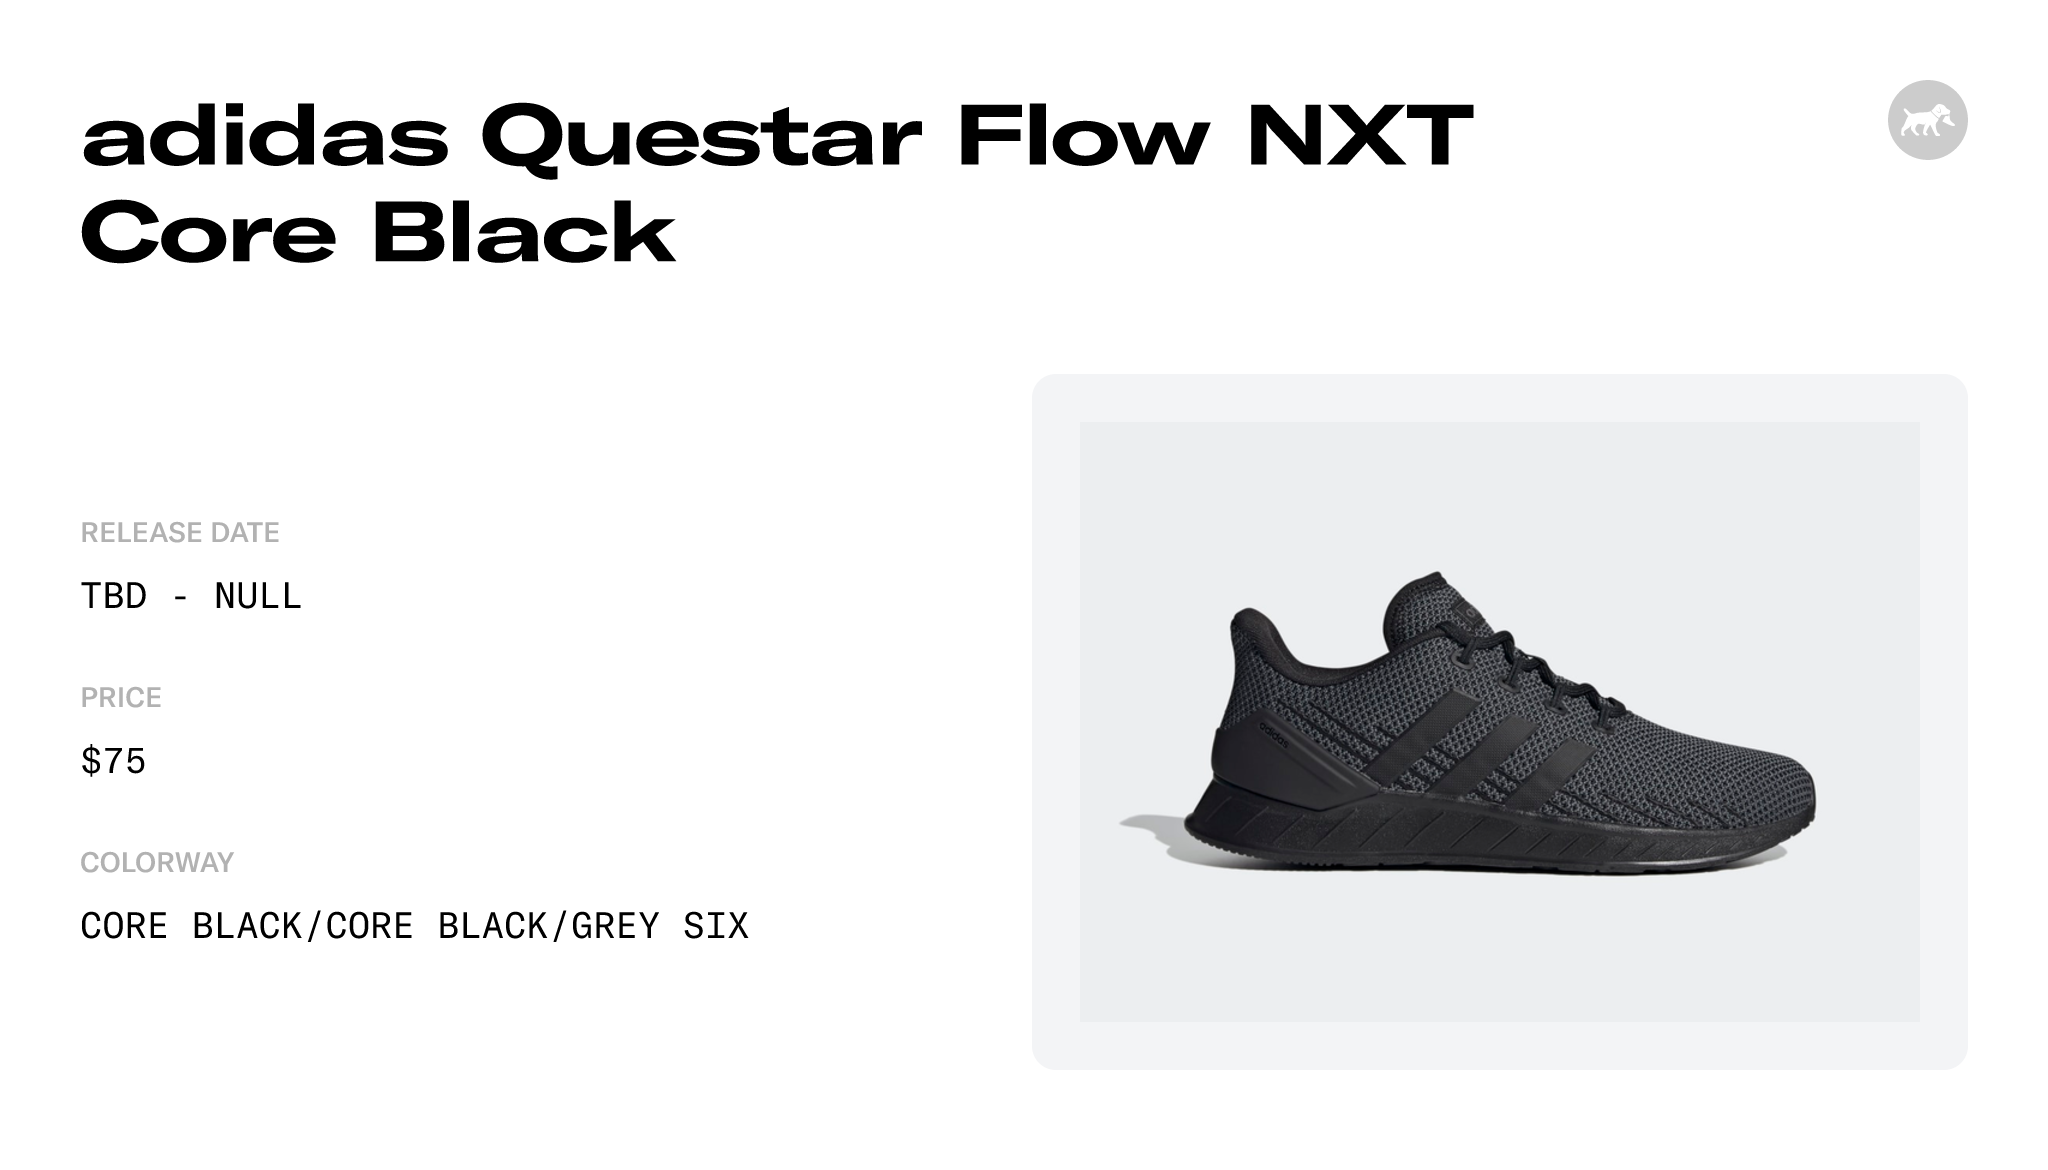 adidas Questar Flow NXT Core Black - FY9559 Raffles and Release Date